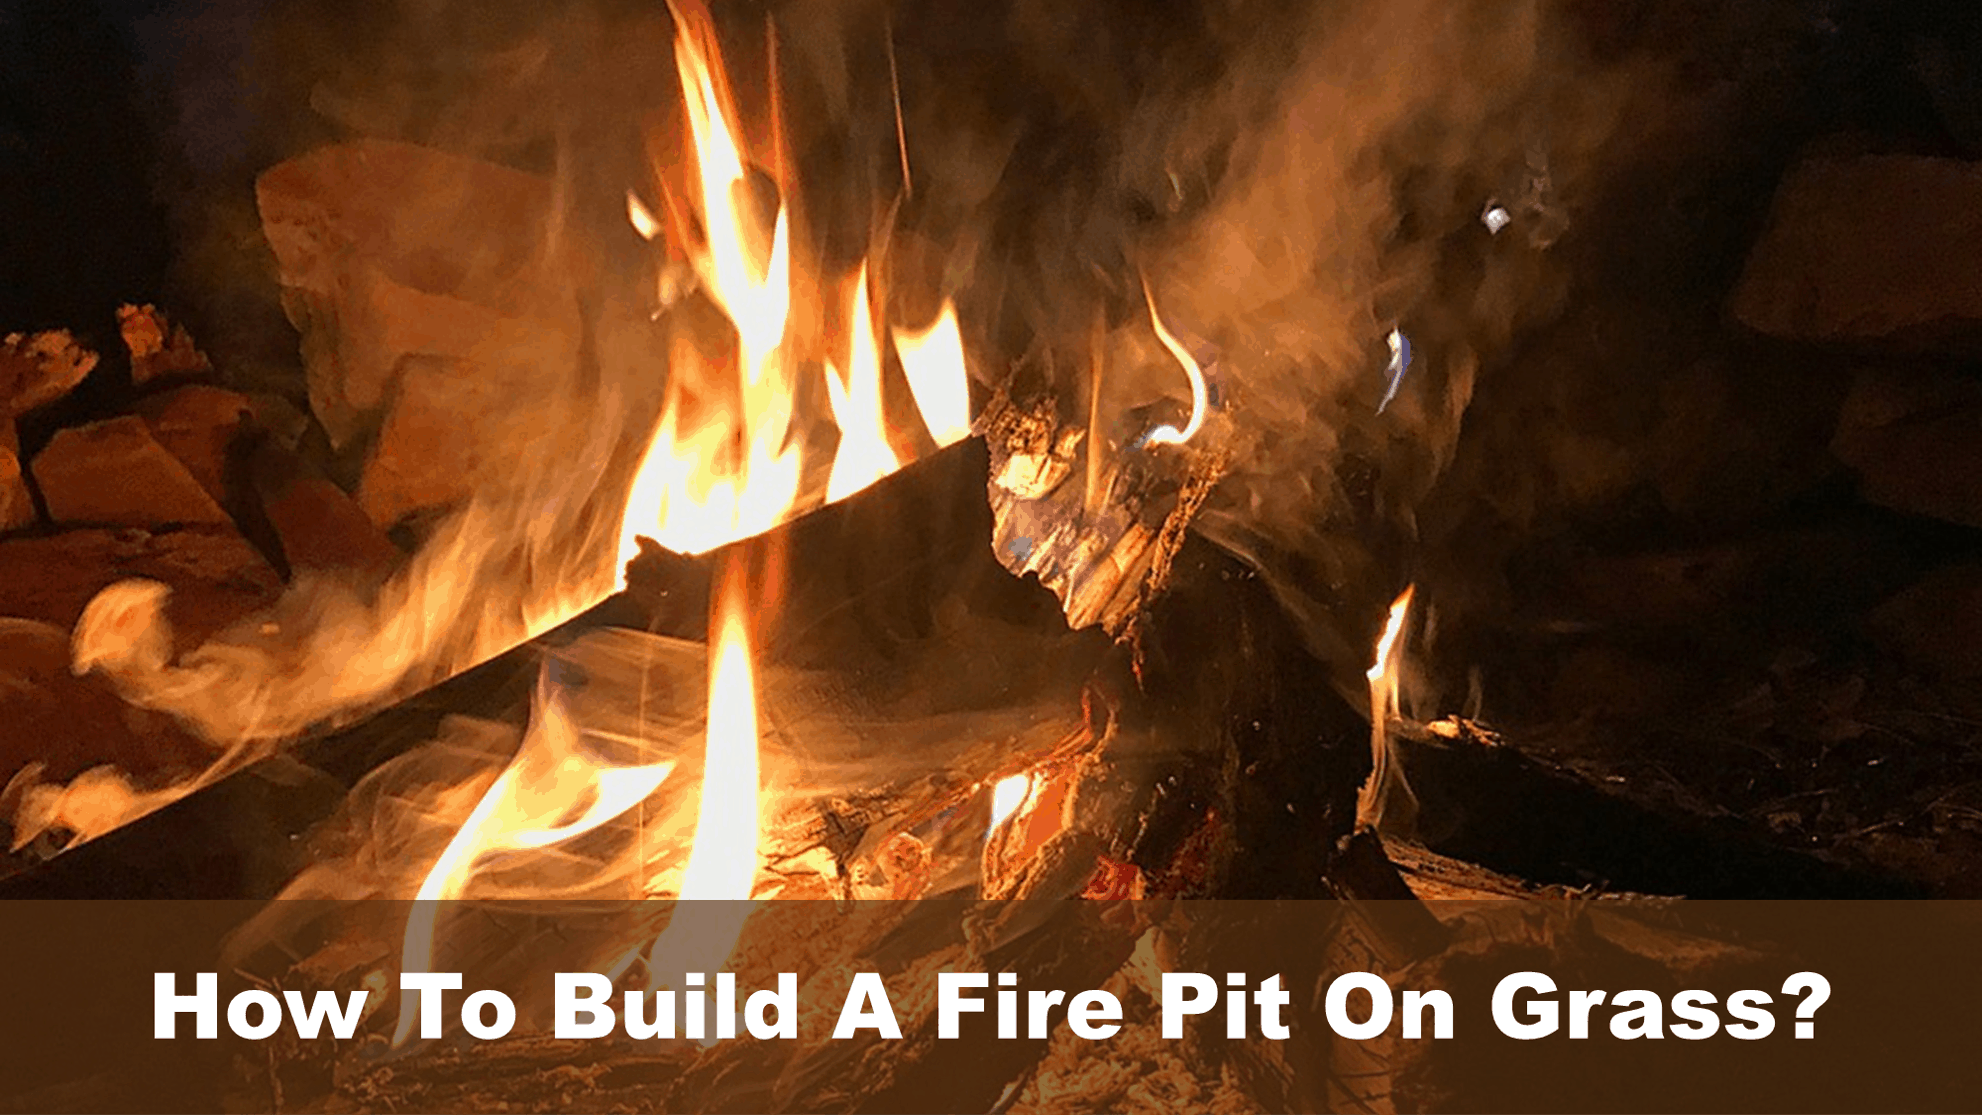 How To Build A Fire Pit On Grass It Is, Can You Put A Portable Fire Pit On Grass